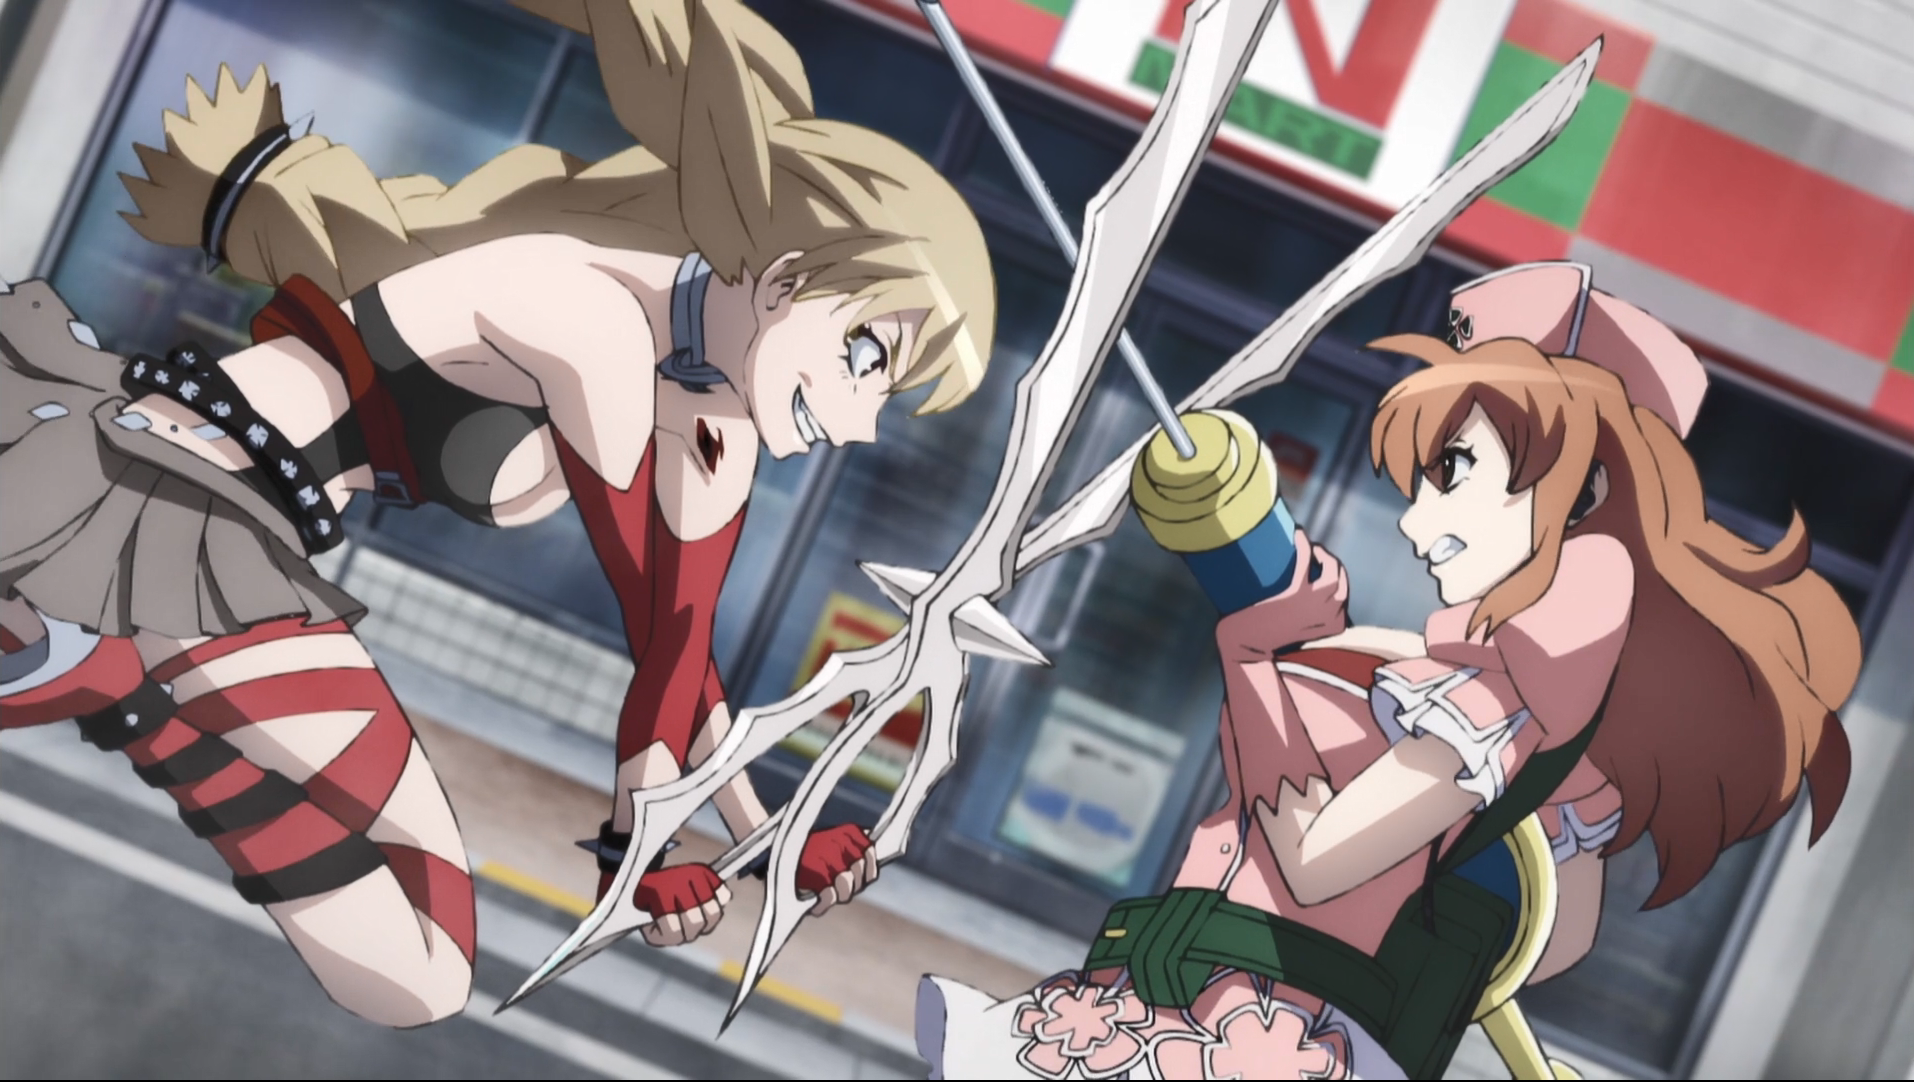 ANIME REVIEW A Gritty Take On Magical Girls With "Spec-Ops Asuka"...